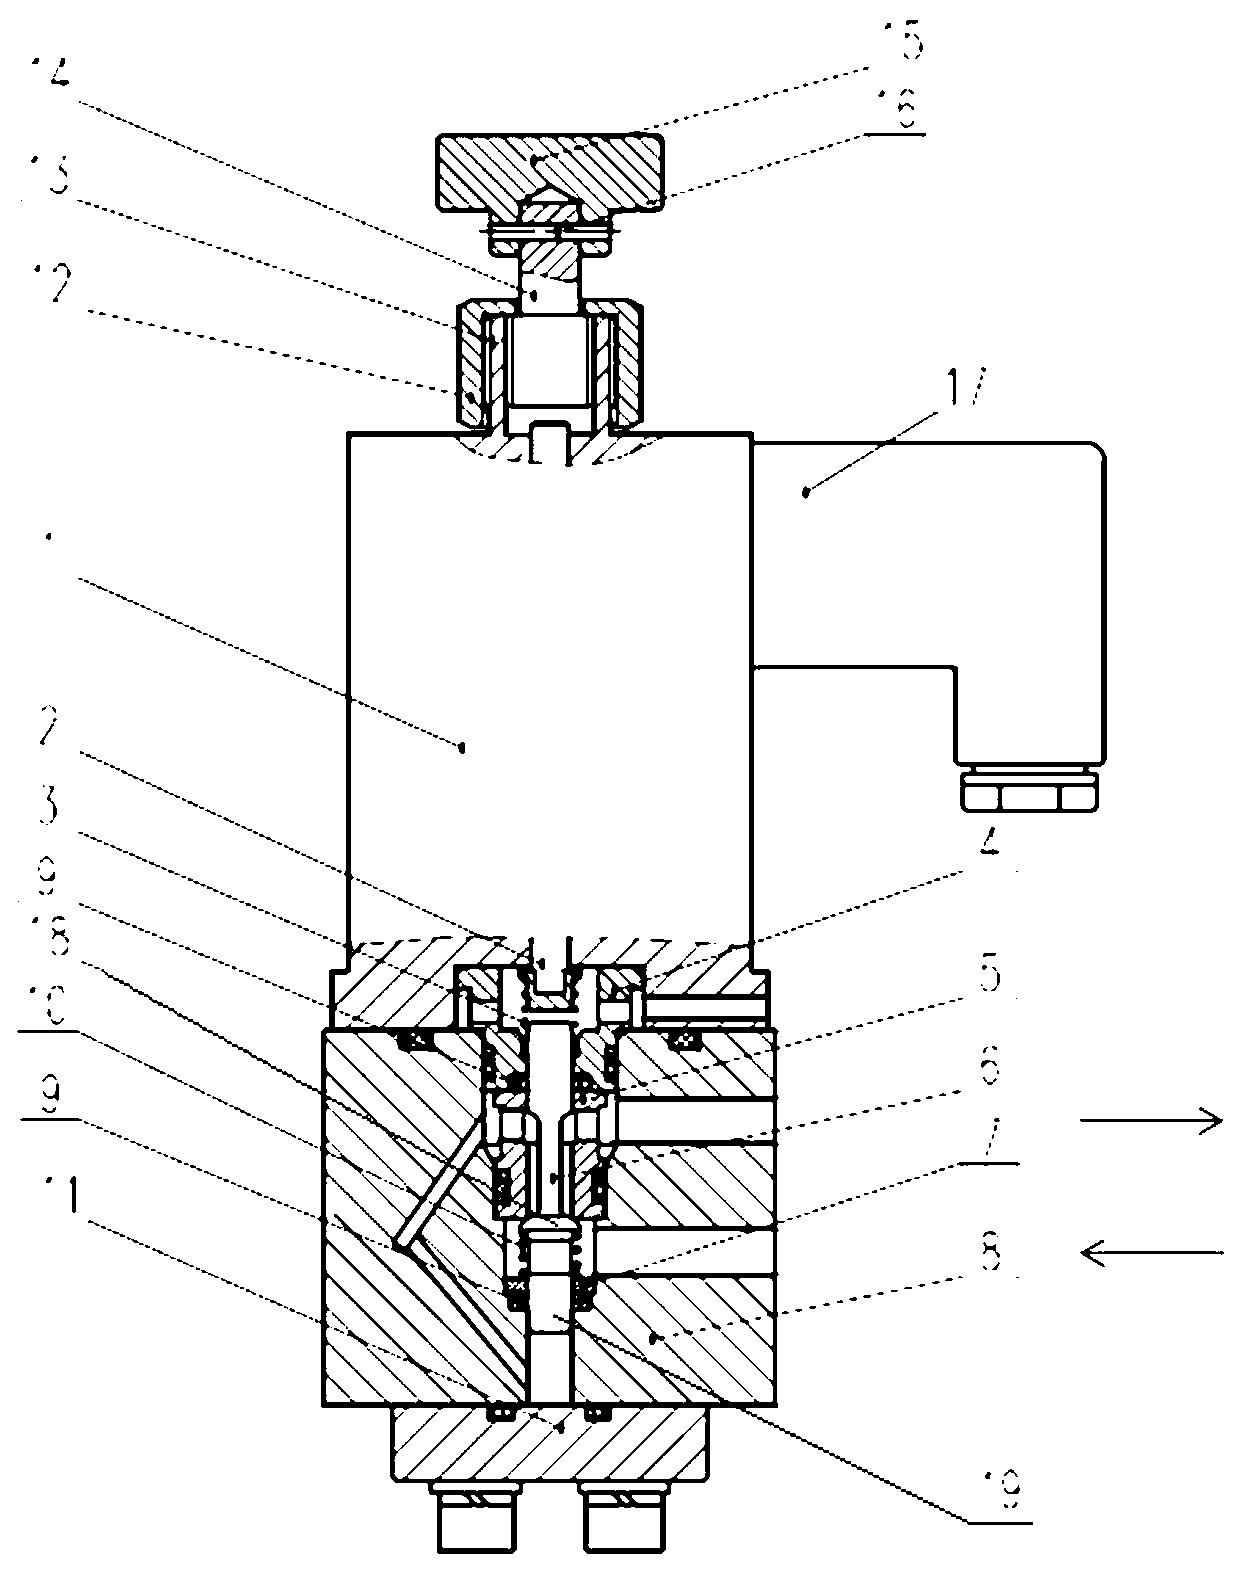 Electromagnetic differential safety valve